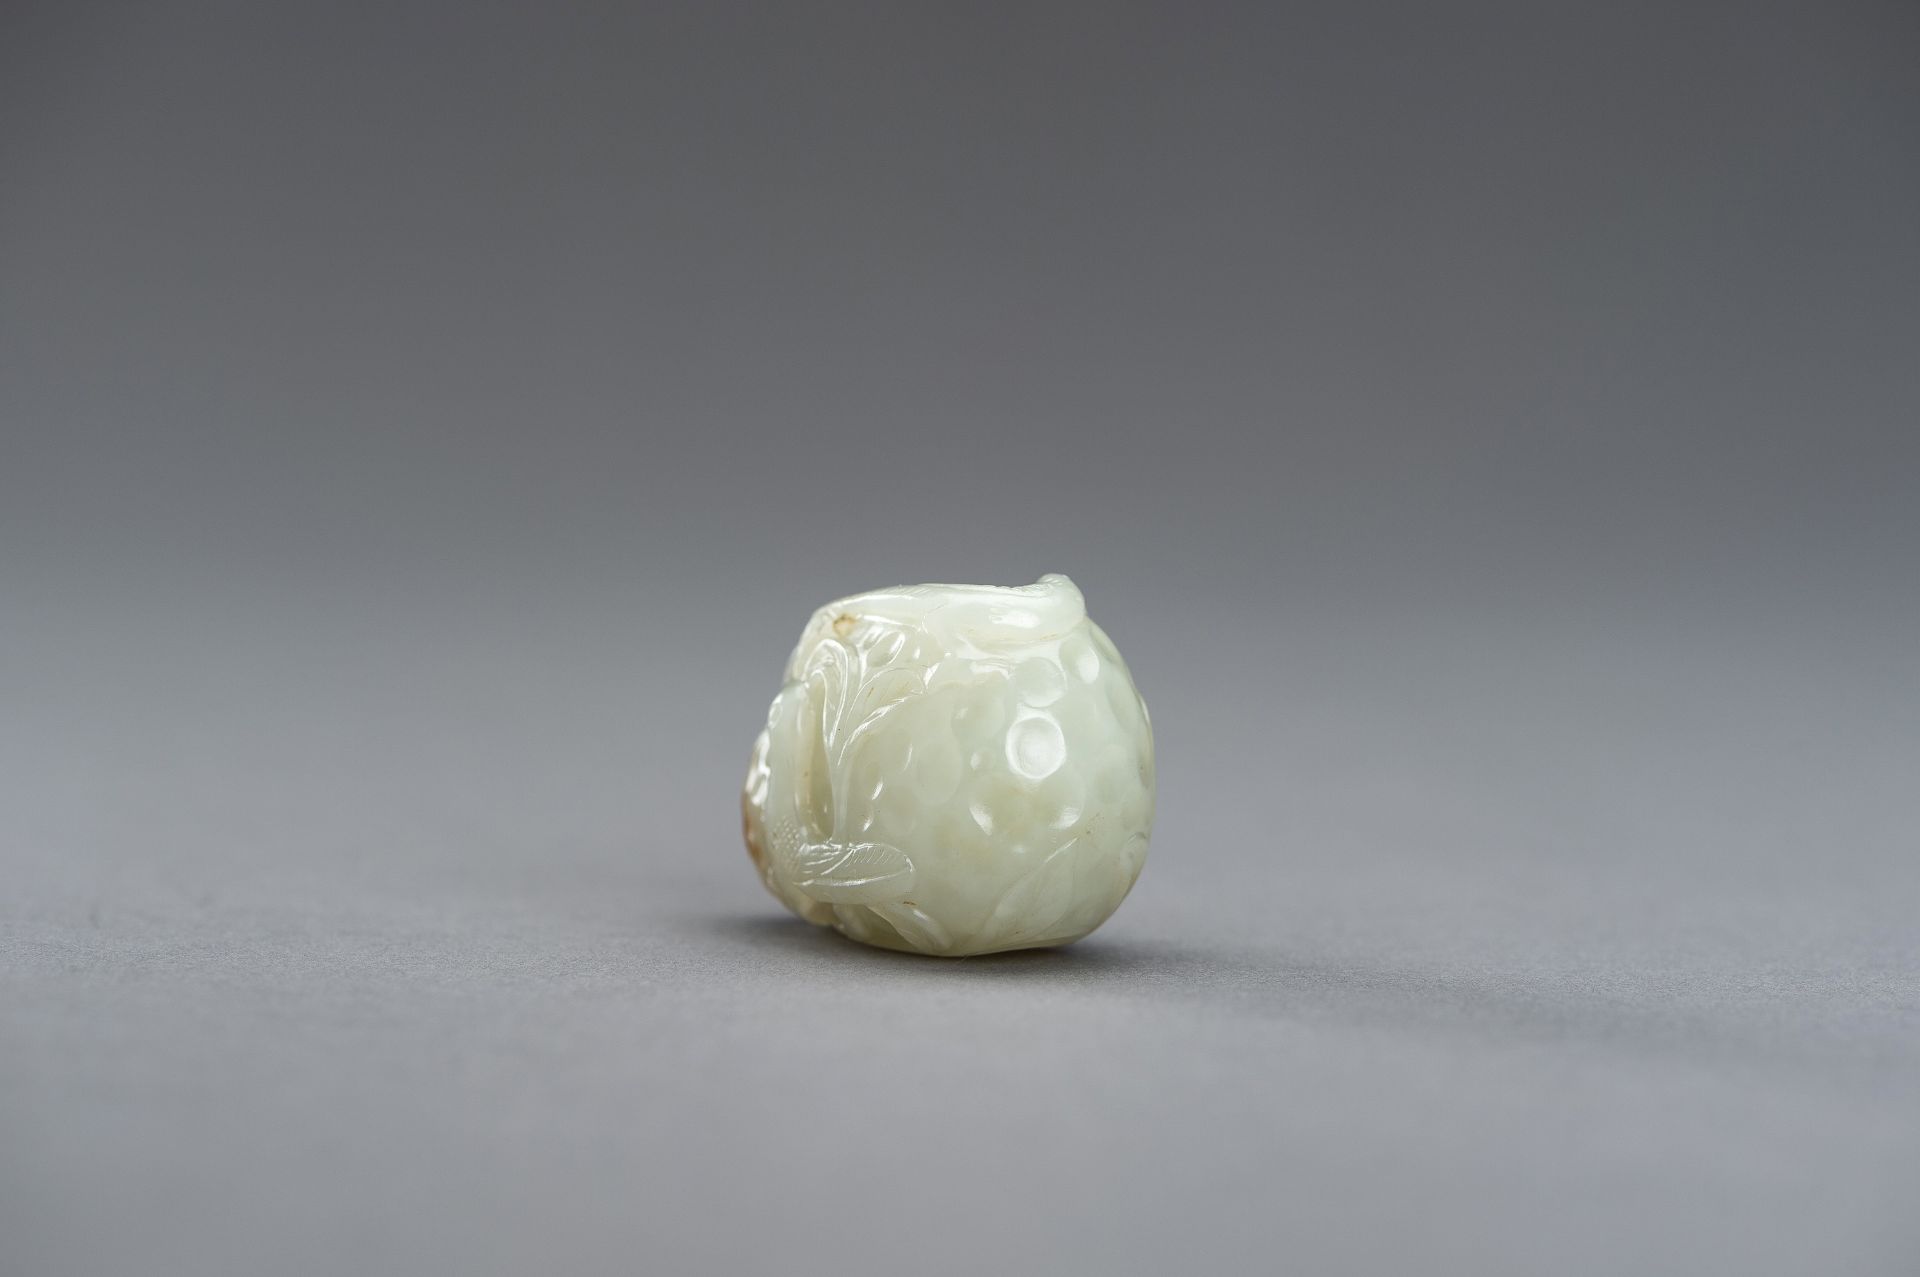 A CELADON JADE PENDANT OF A LYCHEE WITH BIRDS, 1920s - Image 8 of 9